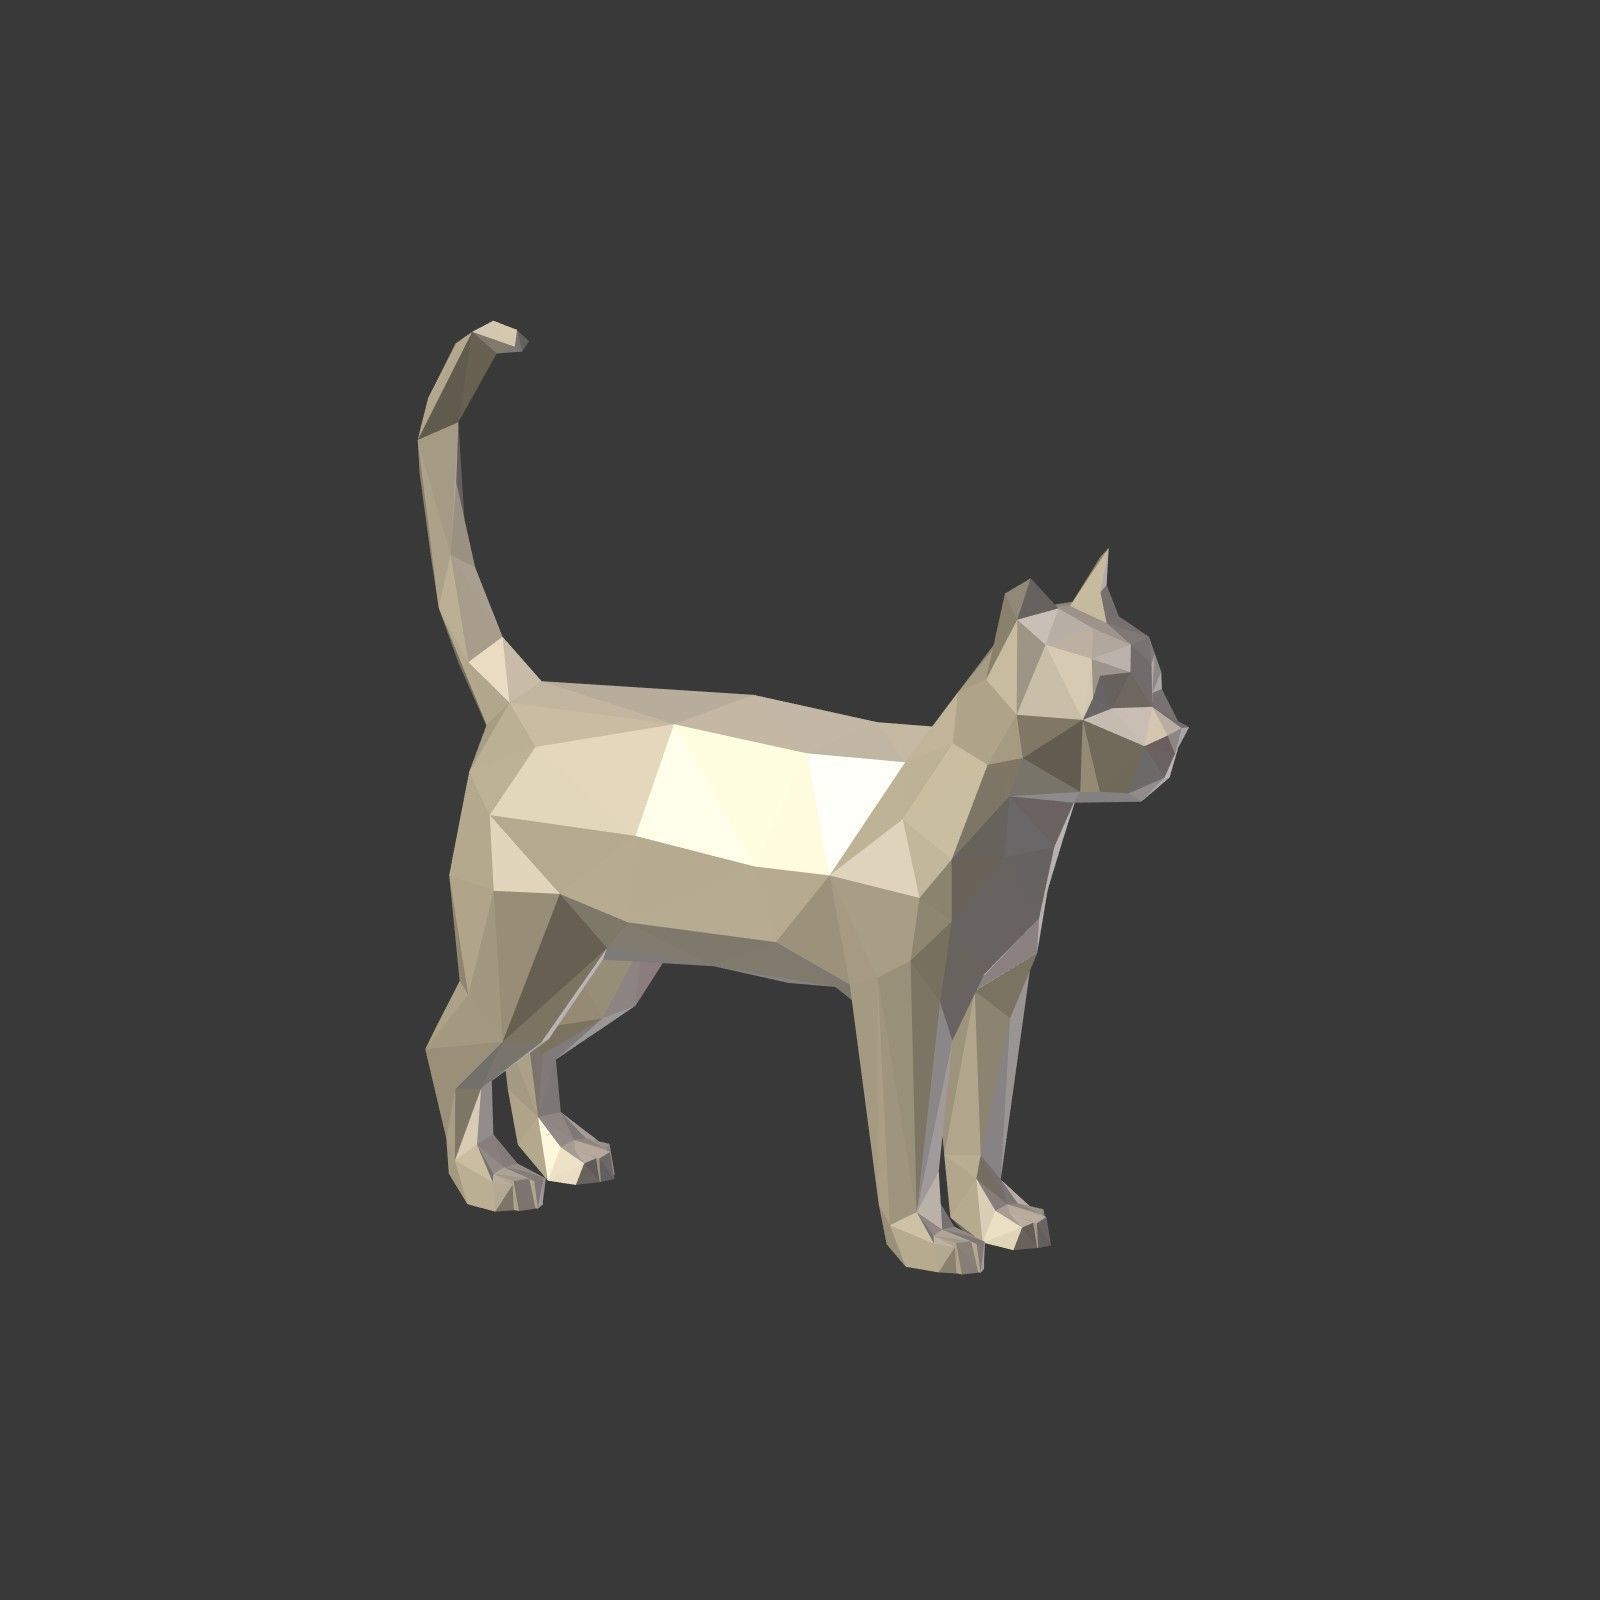 Low Poly Cartoon Cat Model 3D Download For Free